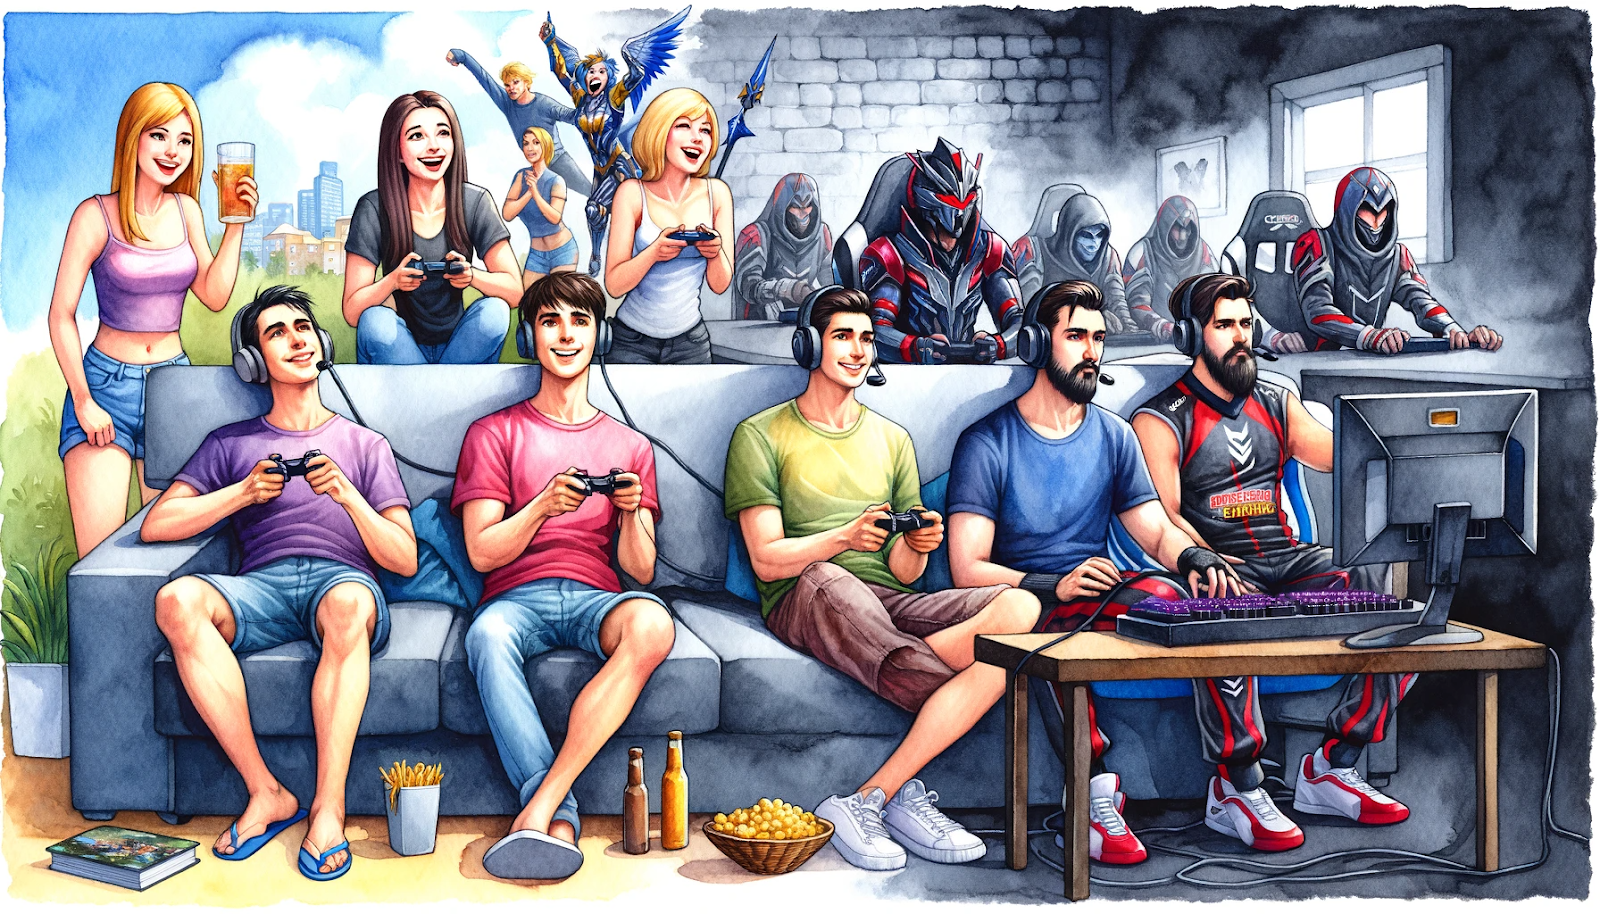 two groups of gamers: one group is casually enjoying a game in a relaxed manner, while the other group is intensely focused in a competitive gaming environment